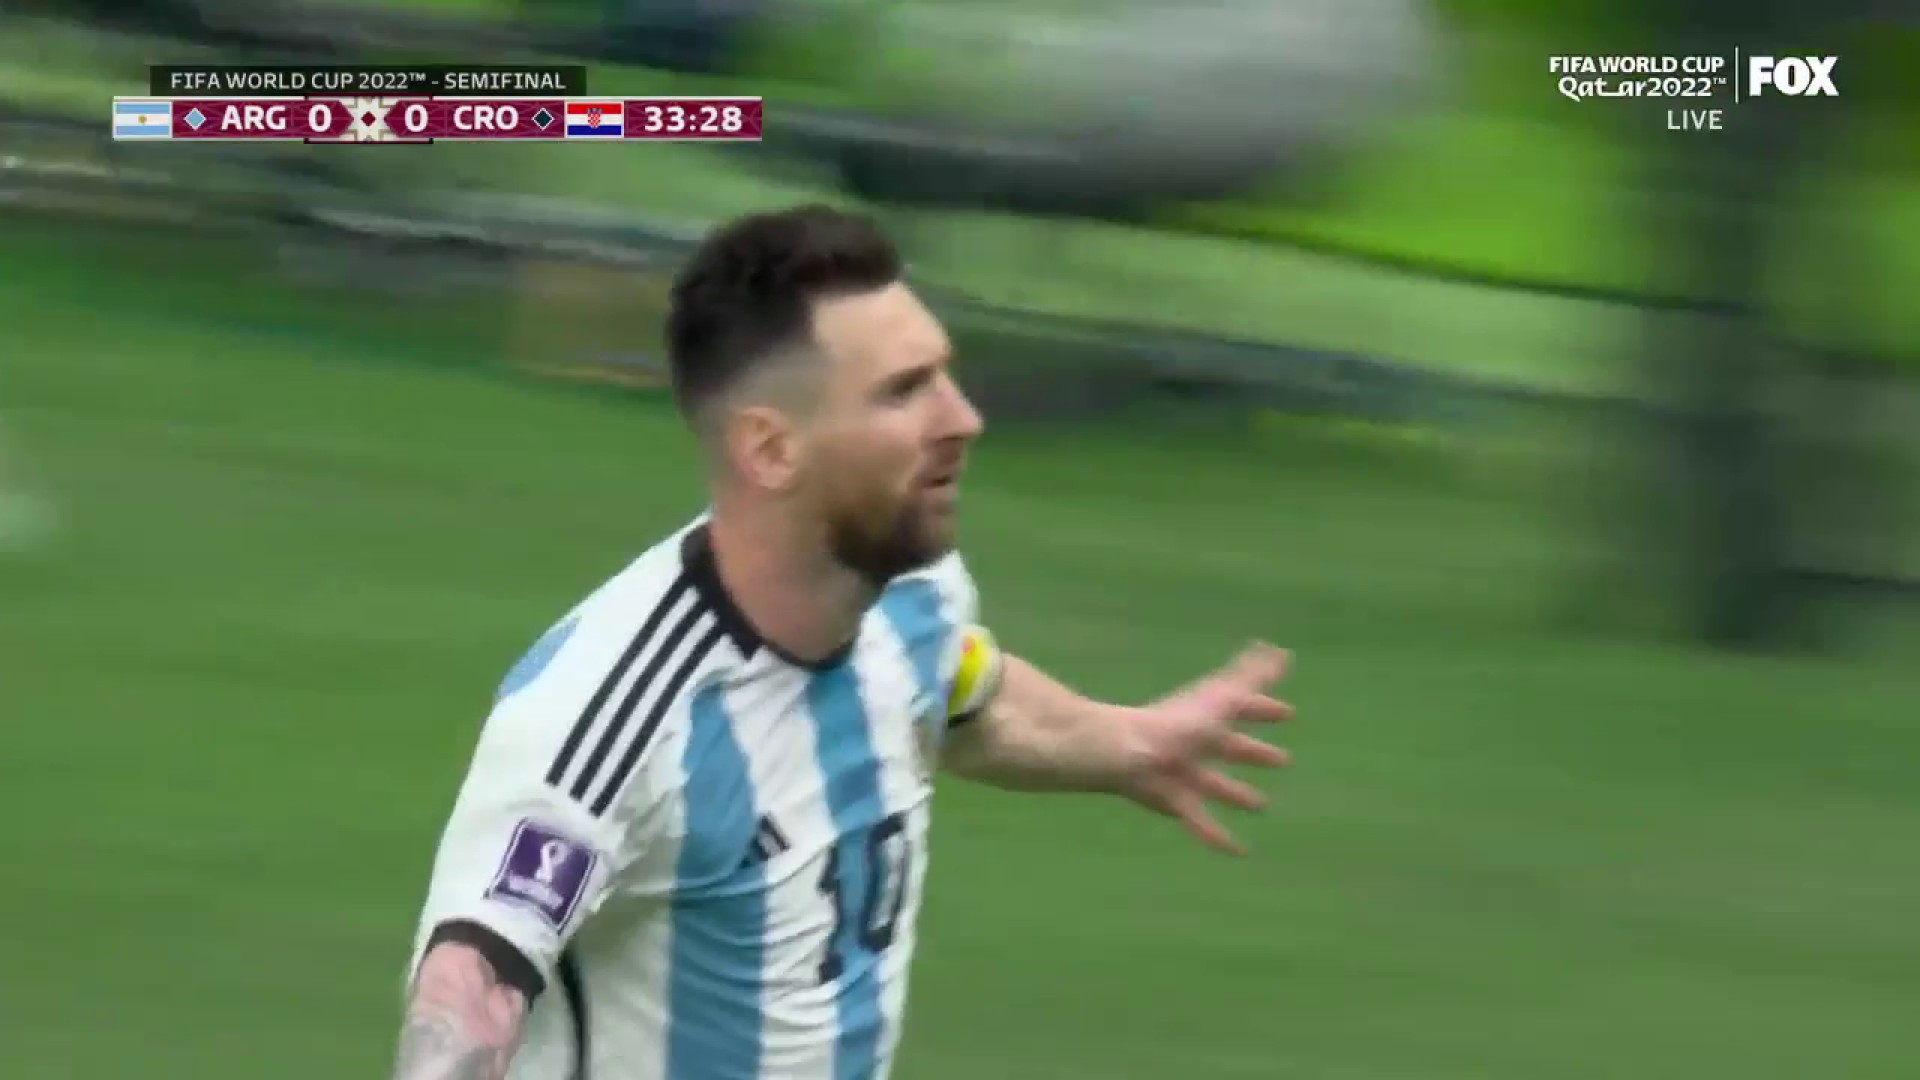 TOO EASY FOR MESSI 🐐

HE PUTS ARGENTINA OUT IN FRONT IN THE SEMIFINALS 🇦🇷”